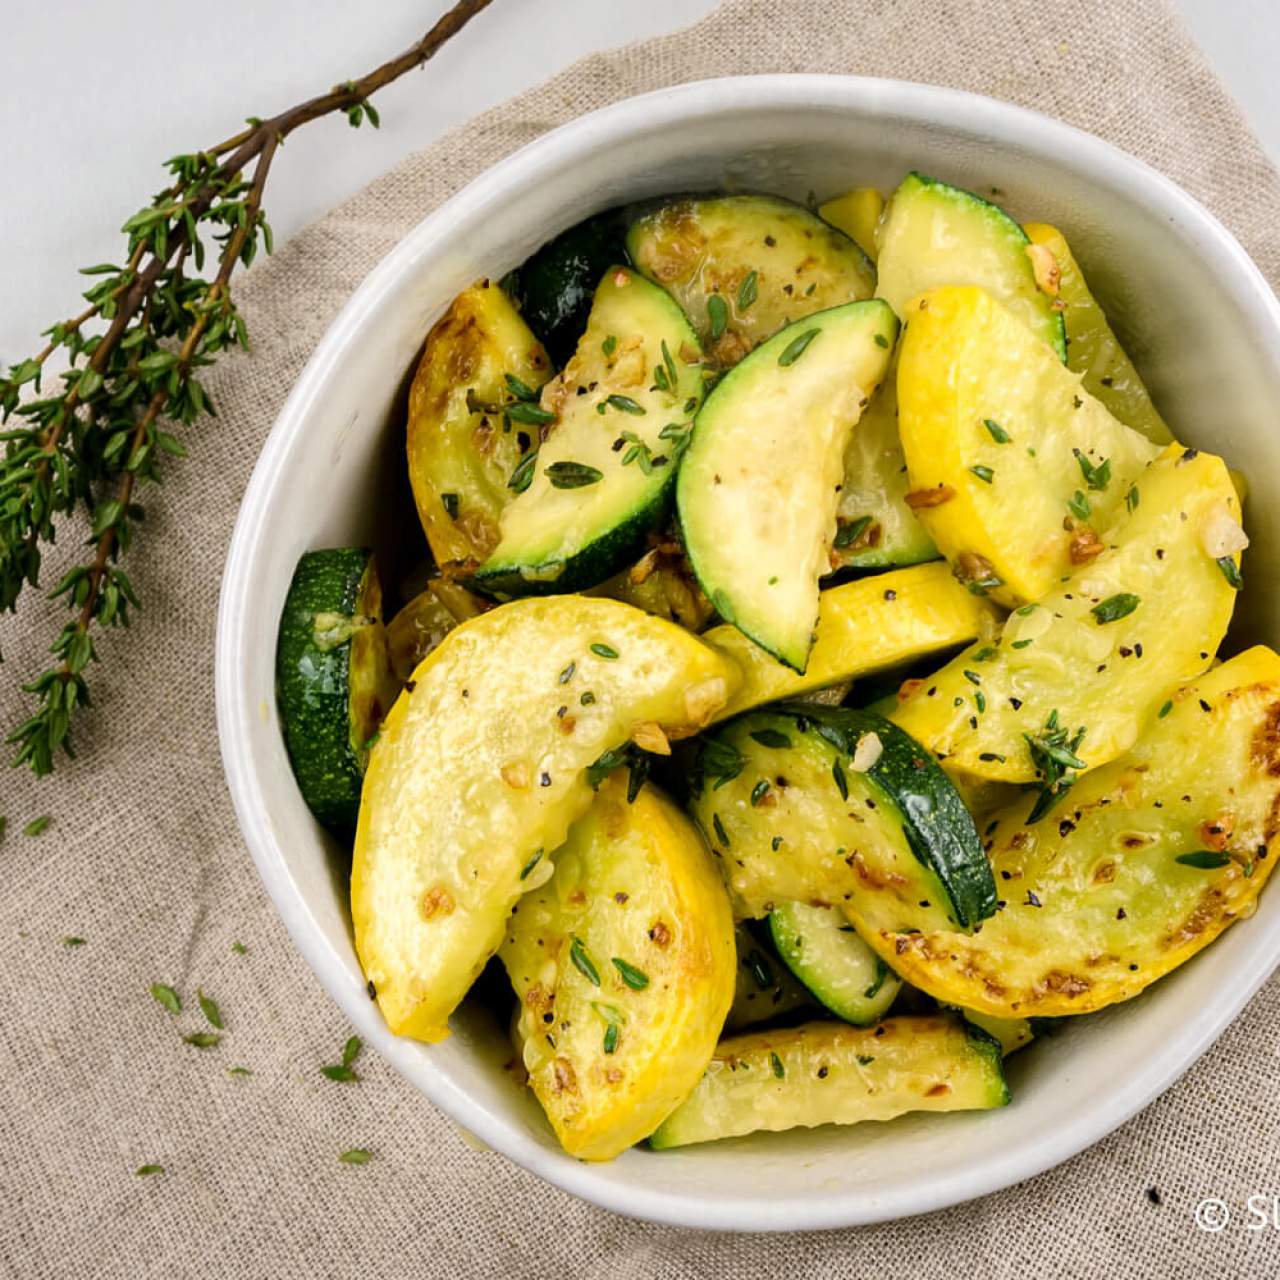 Best 3 Sauteed Zucchini With Garlic And Herbs Recipes